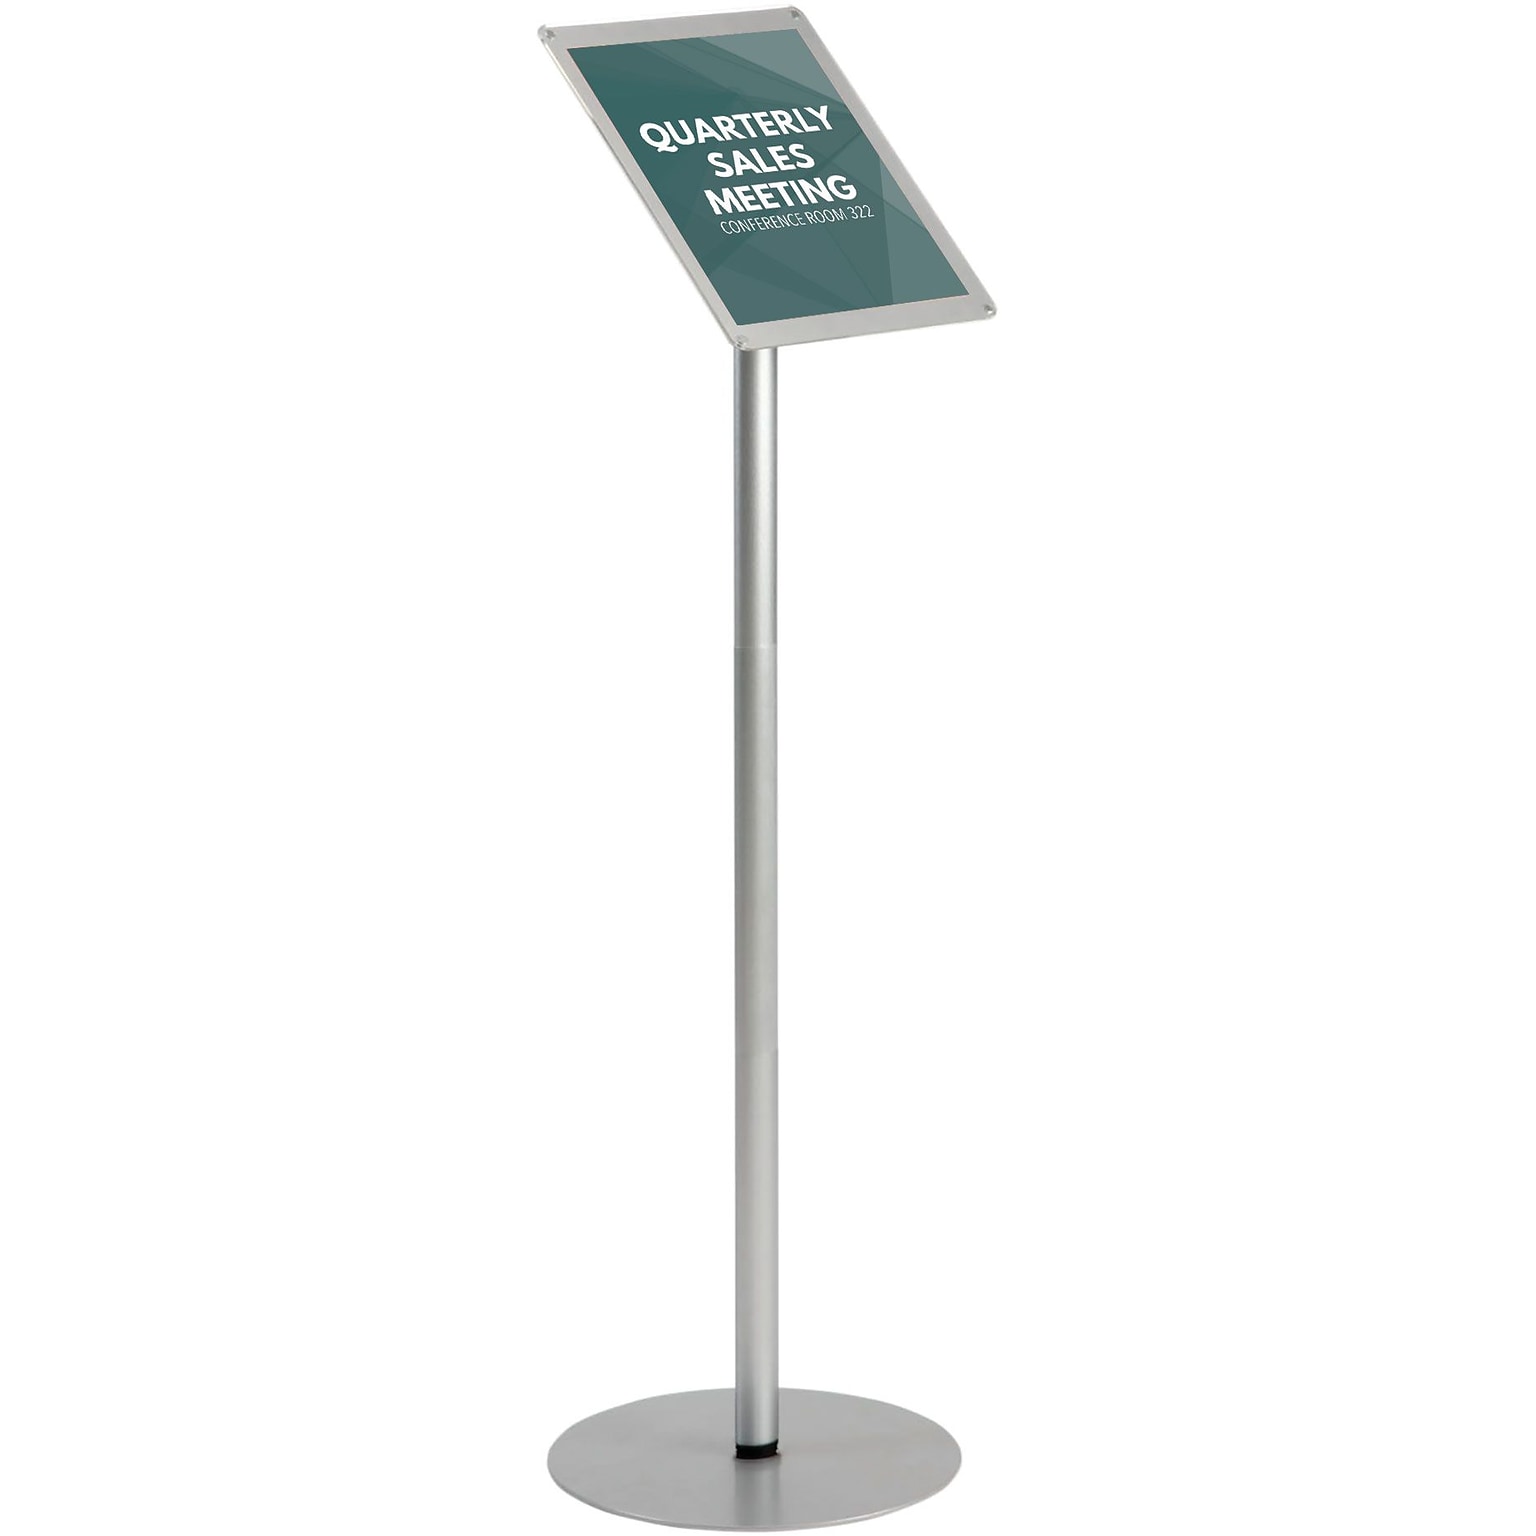 Deflecto Contemporary Literature Displays, 8-1/2x11 Floor Sign Stand w/ Back Pocket, Silver (692045)